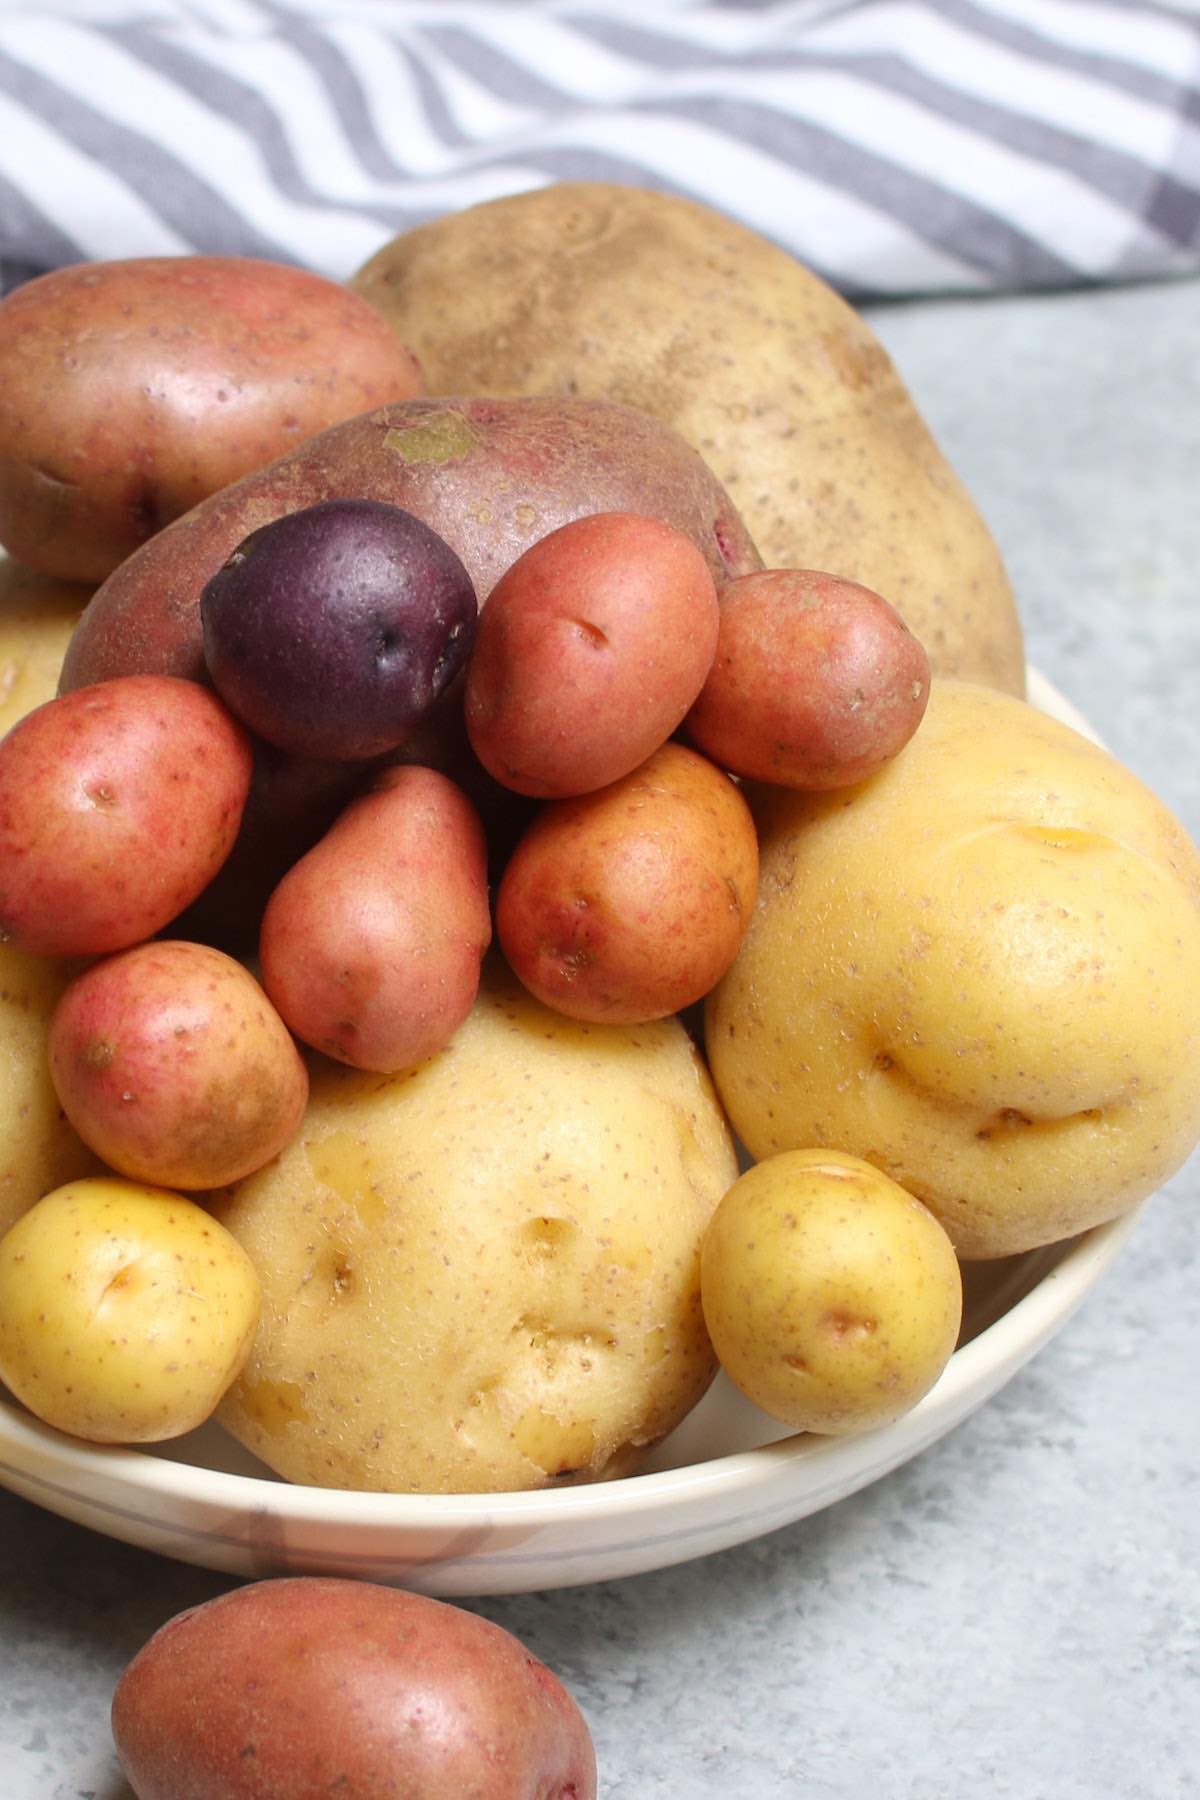 Varieties of potatoes incuding red potatoes, Yukon Golds, russets and baby potatoes